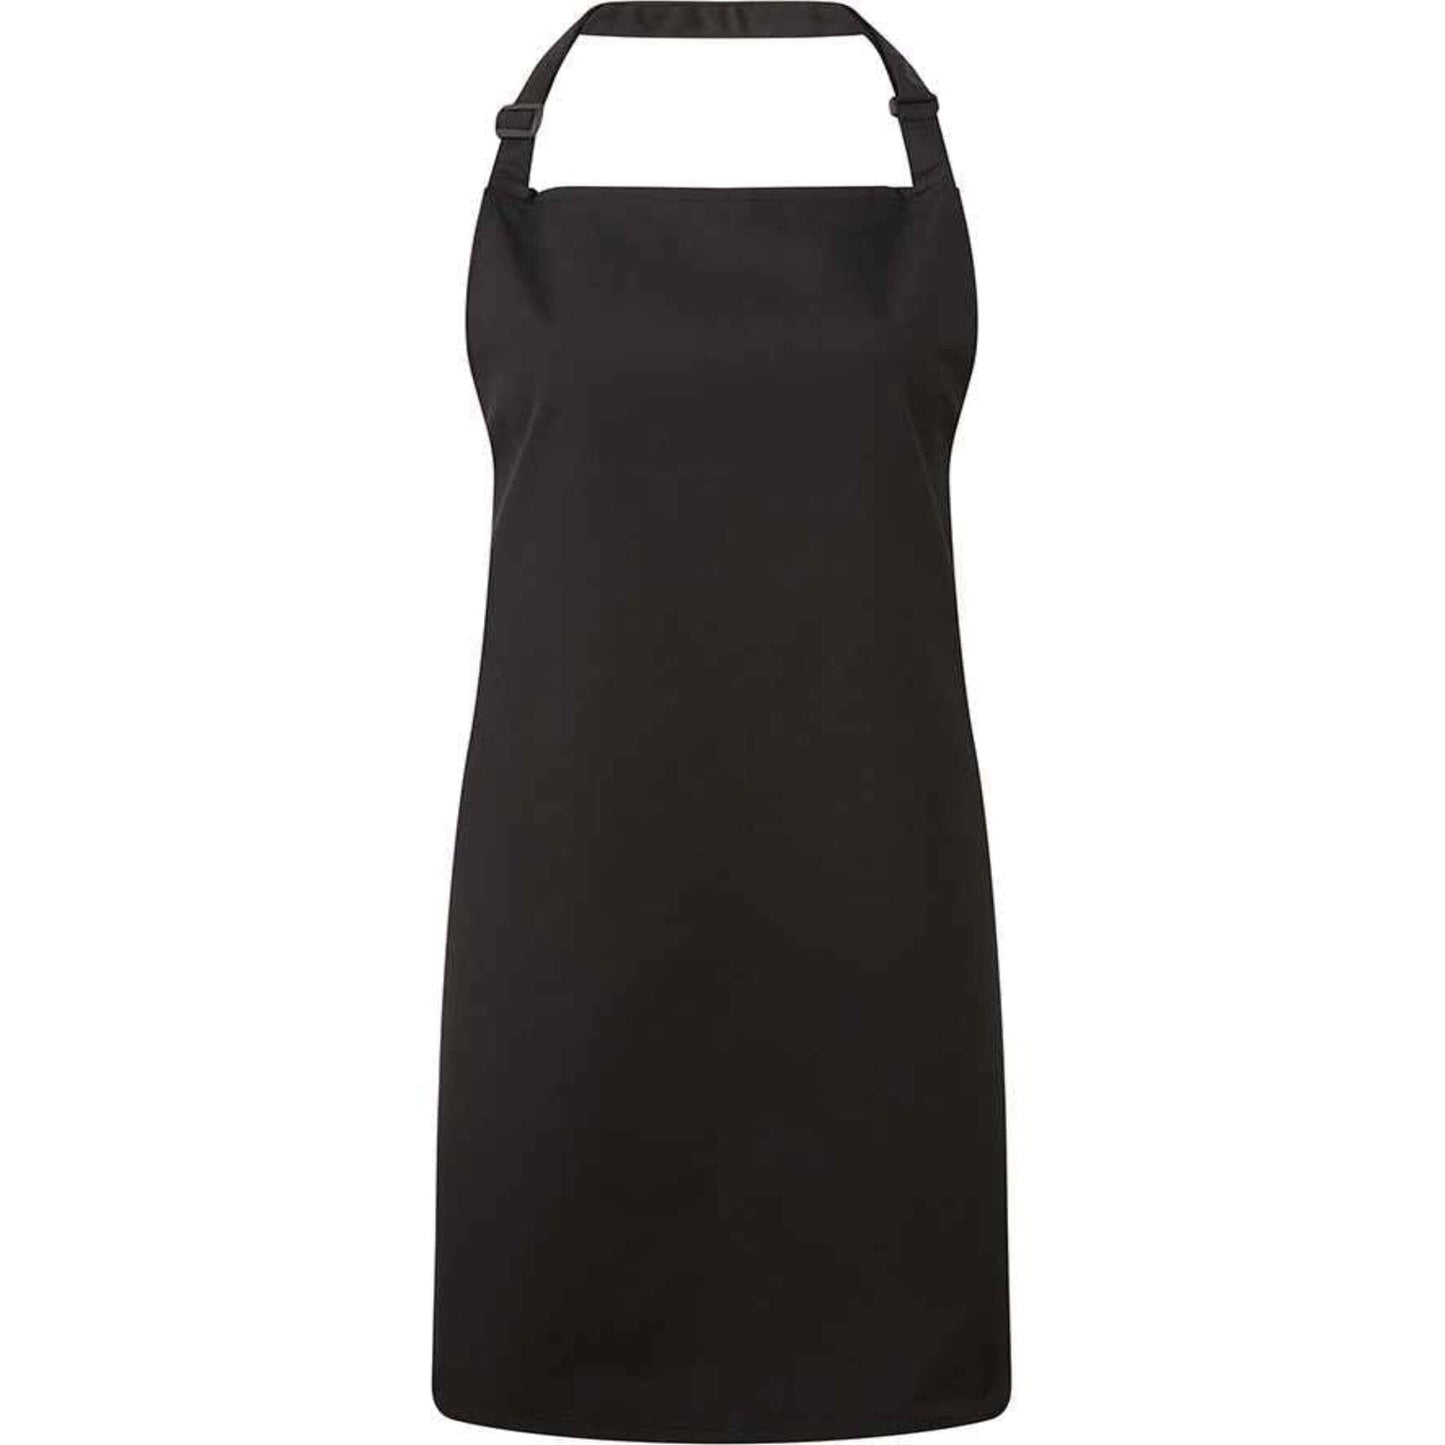 Personalised Apron with your Logo